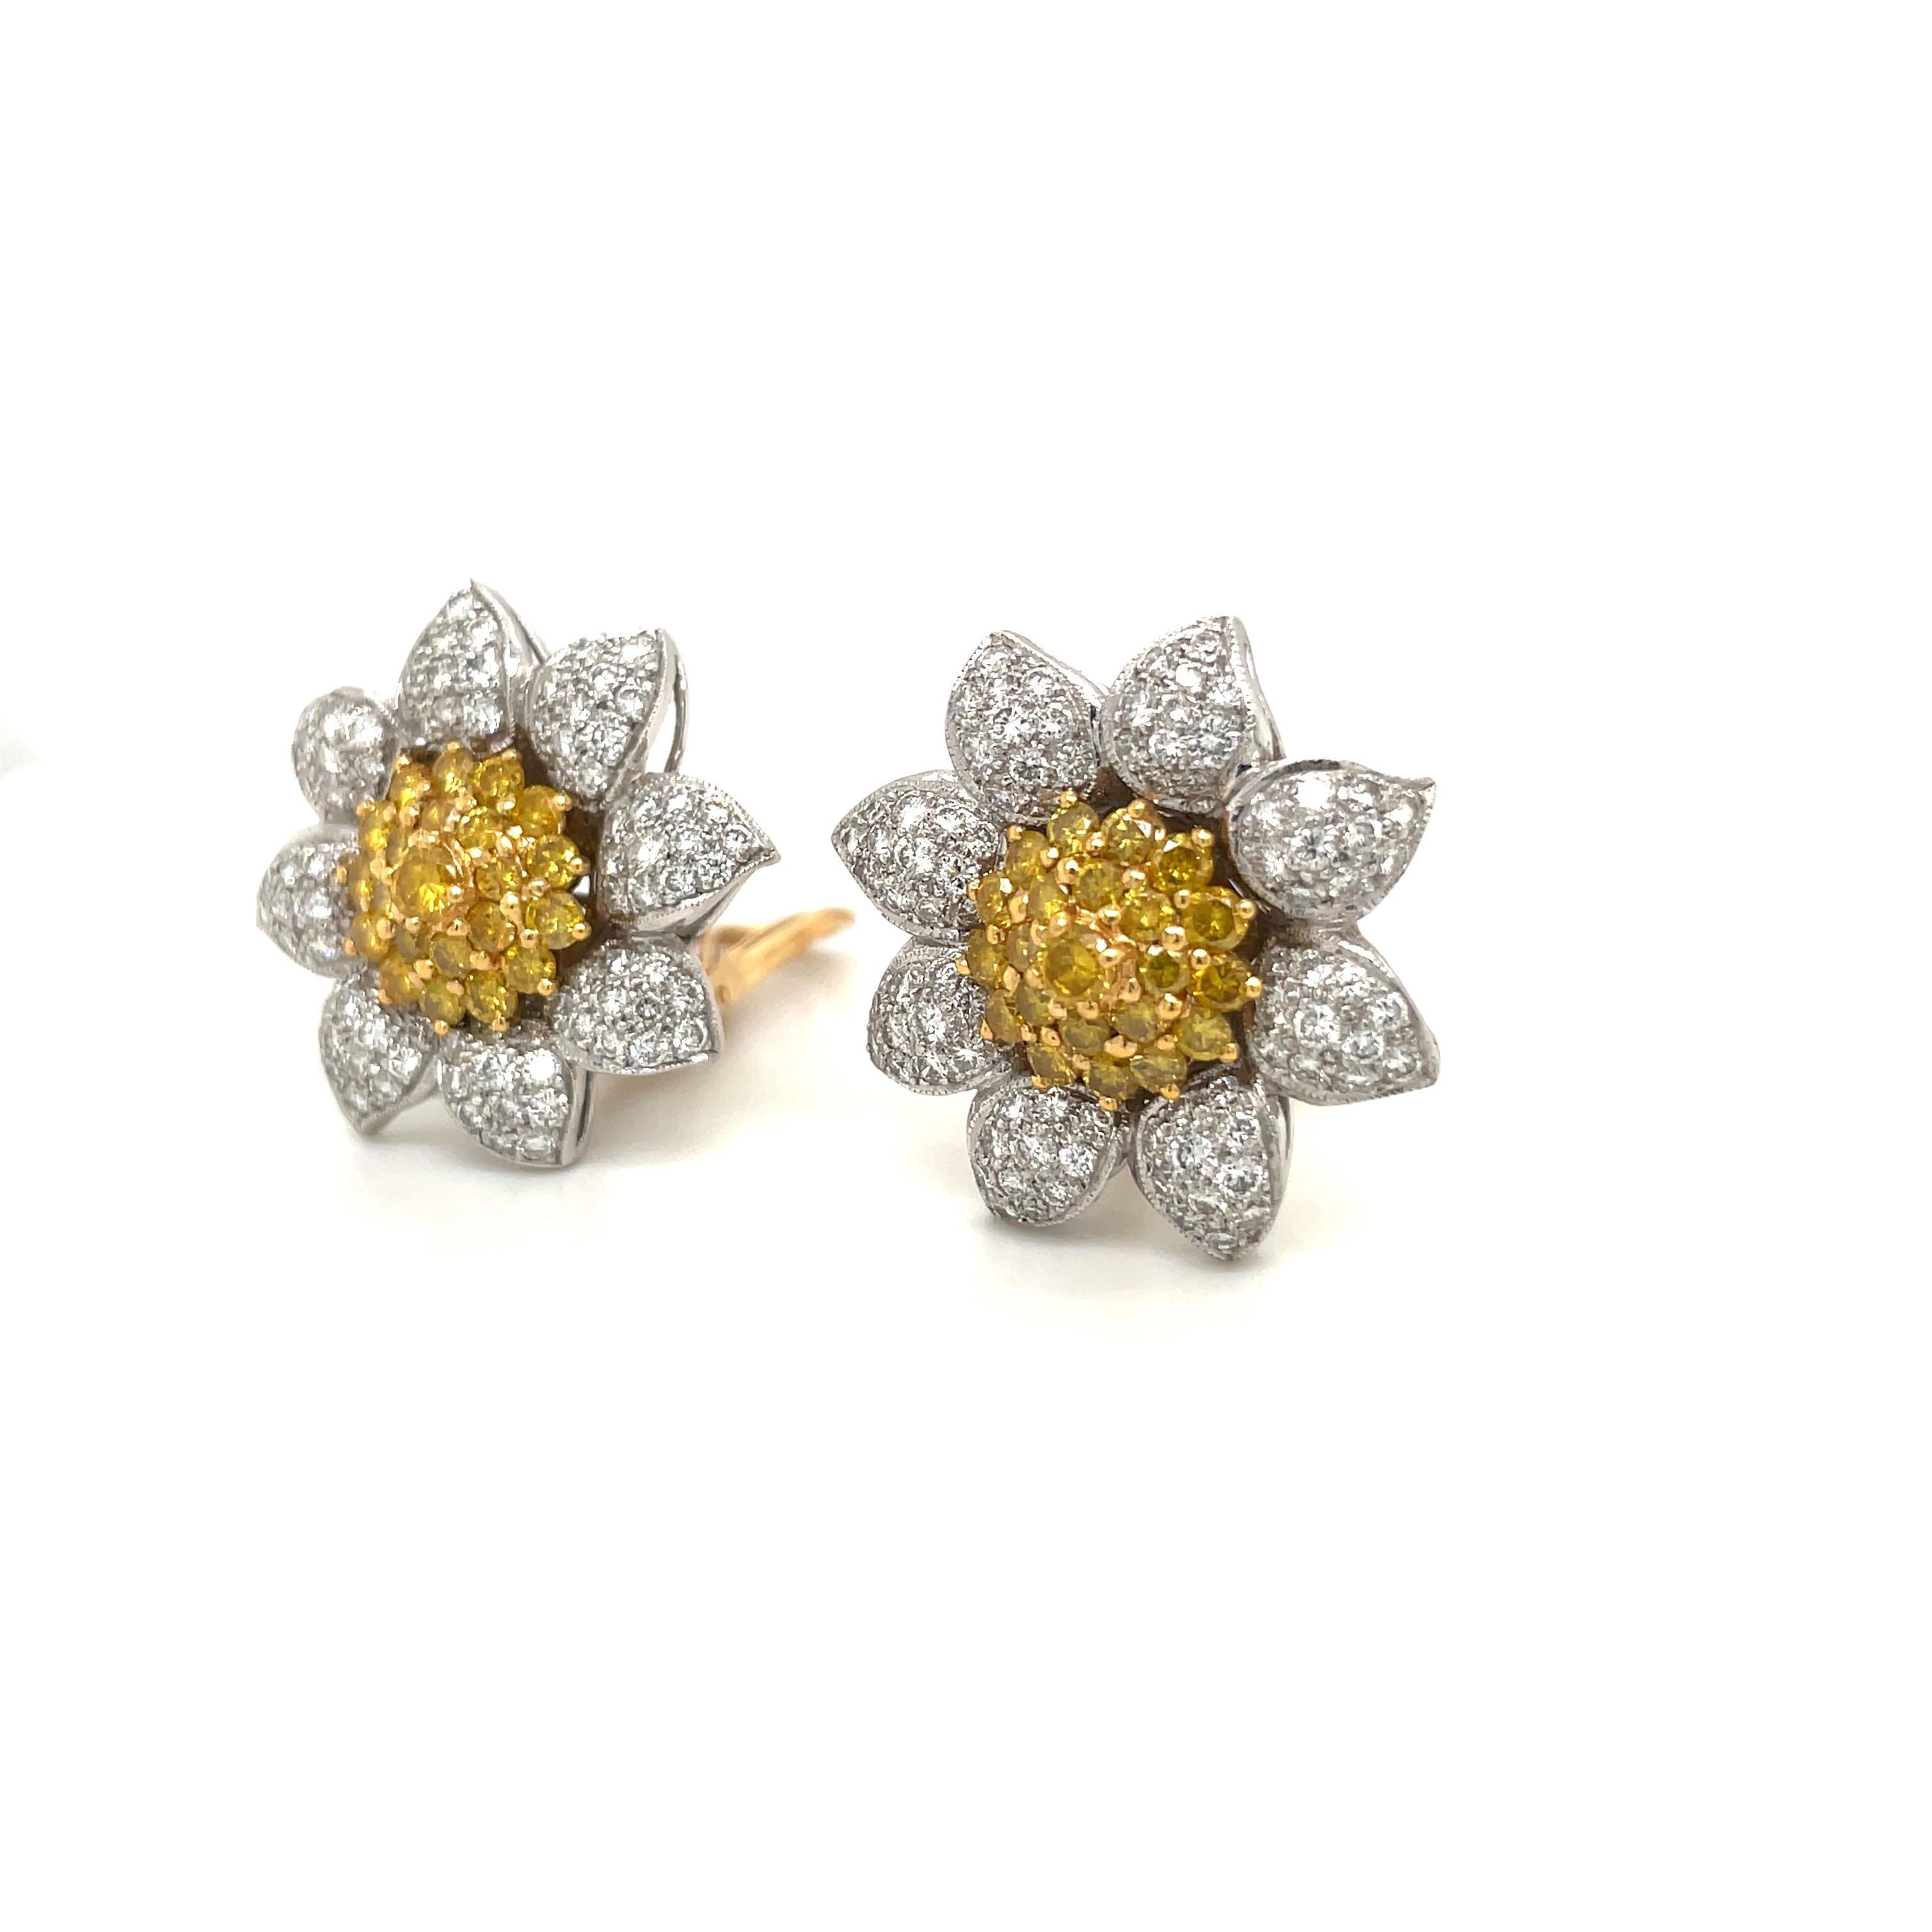 Contemporary Cellini 18kt Gold 3.03ct White Diamond Flower with 2.32ct. Yellow Diamond Center For Sale